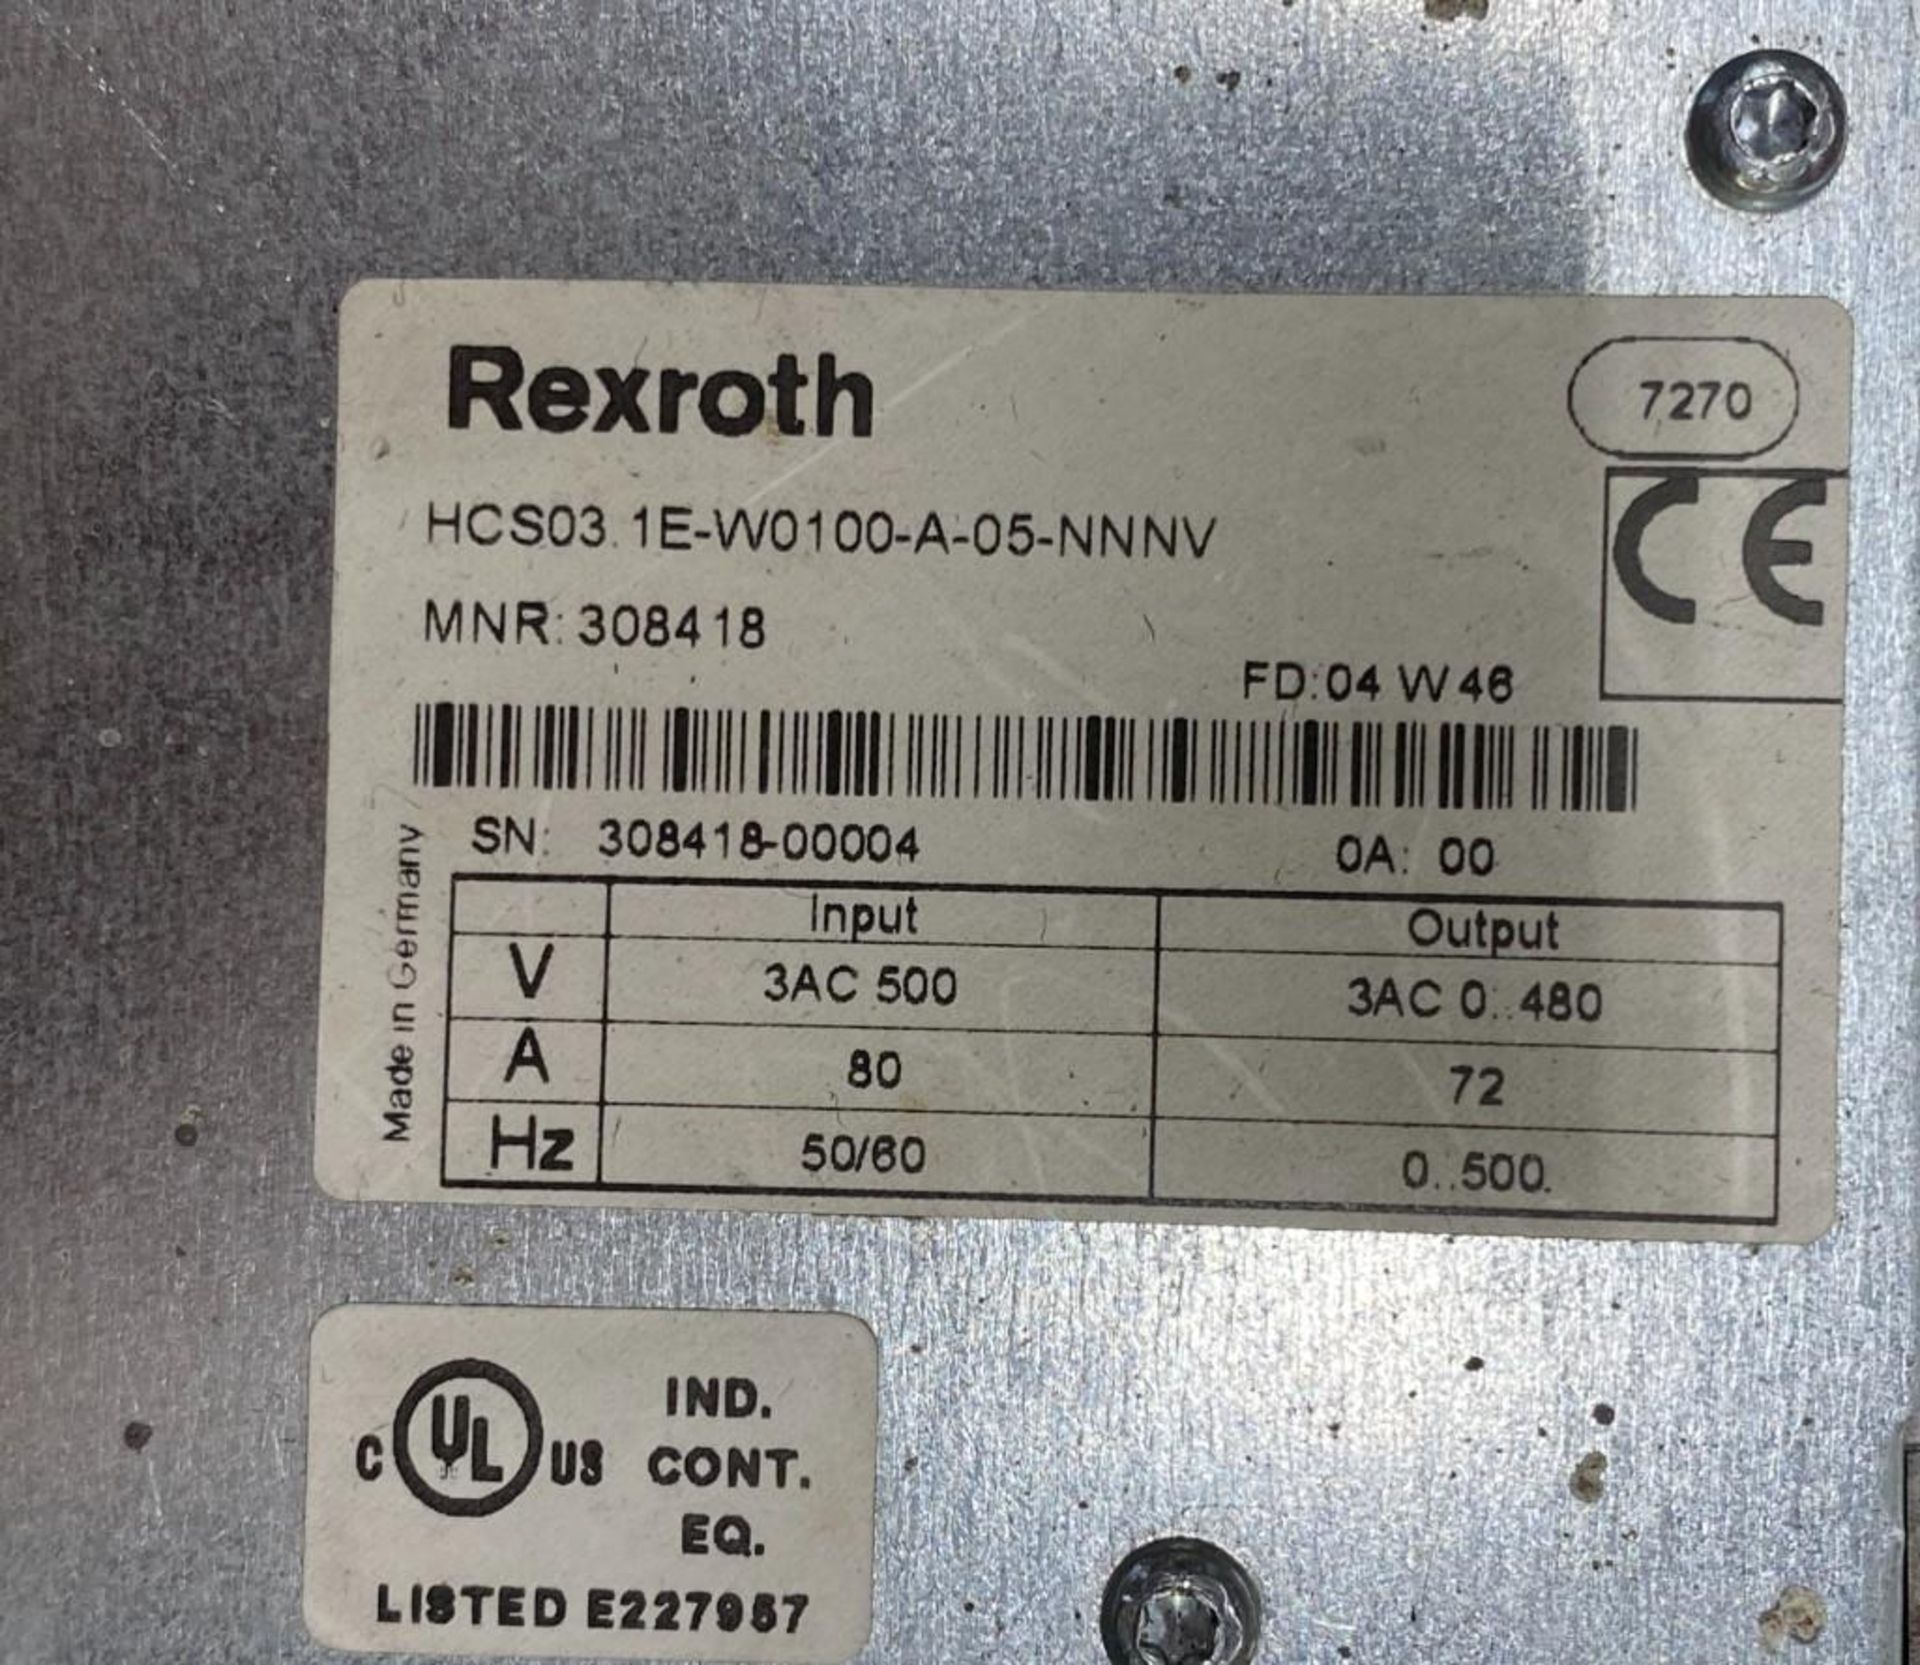 USED SPARE REXROTH DRIVE HCS03 1E-W0100-A-05-NNNV - Image 2 of 3